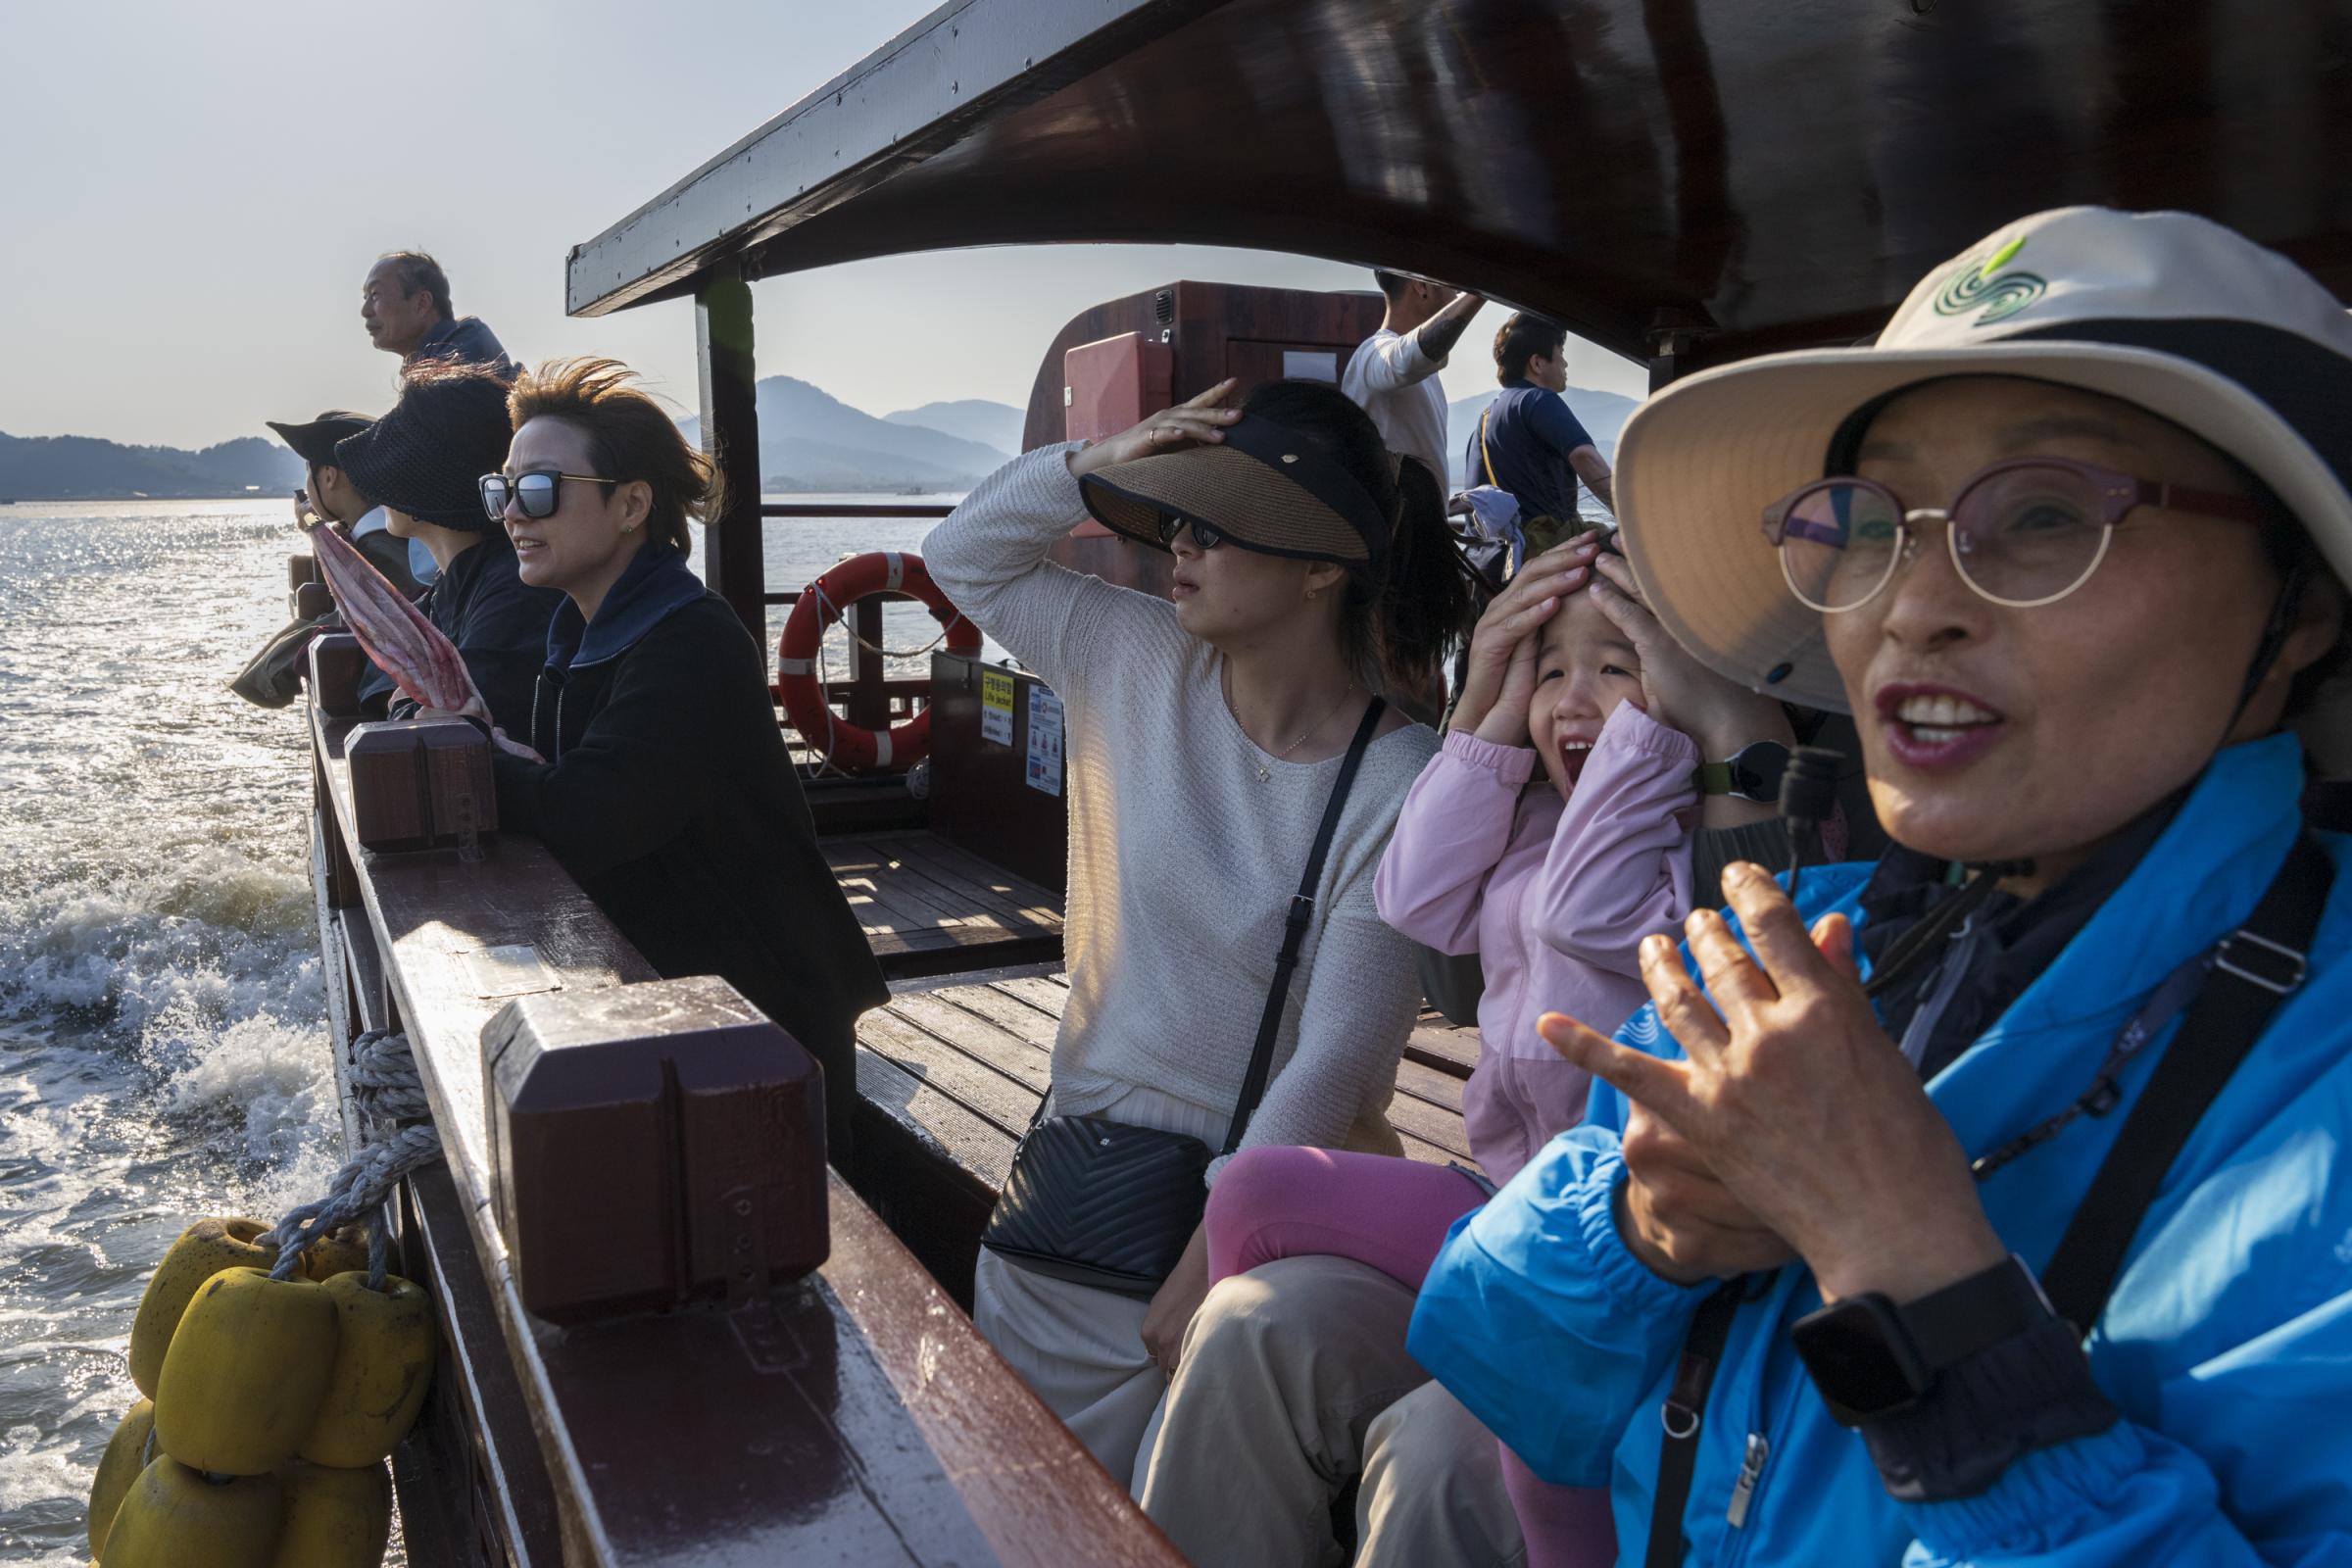 Saving South Korea's Tidal Flats -  Ecotourist guide Sunjeong Heo points out a flock of...